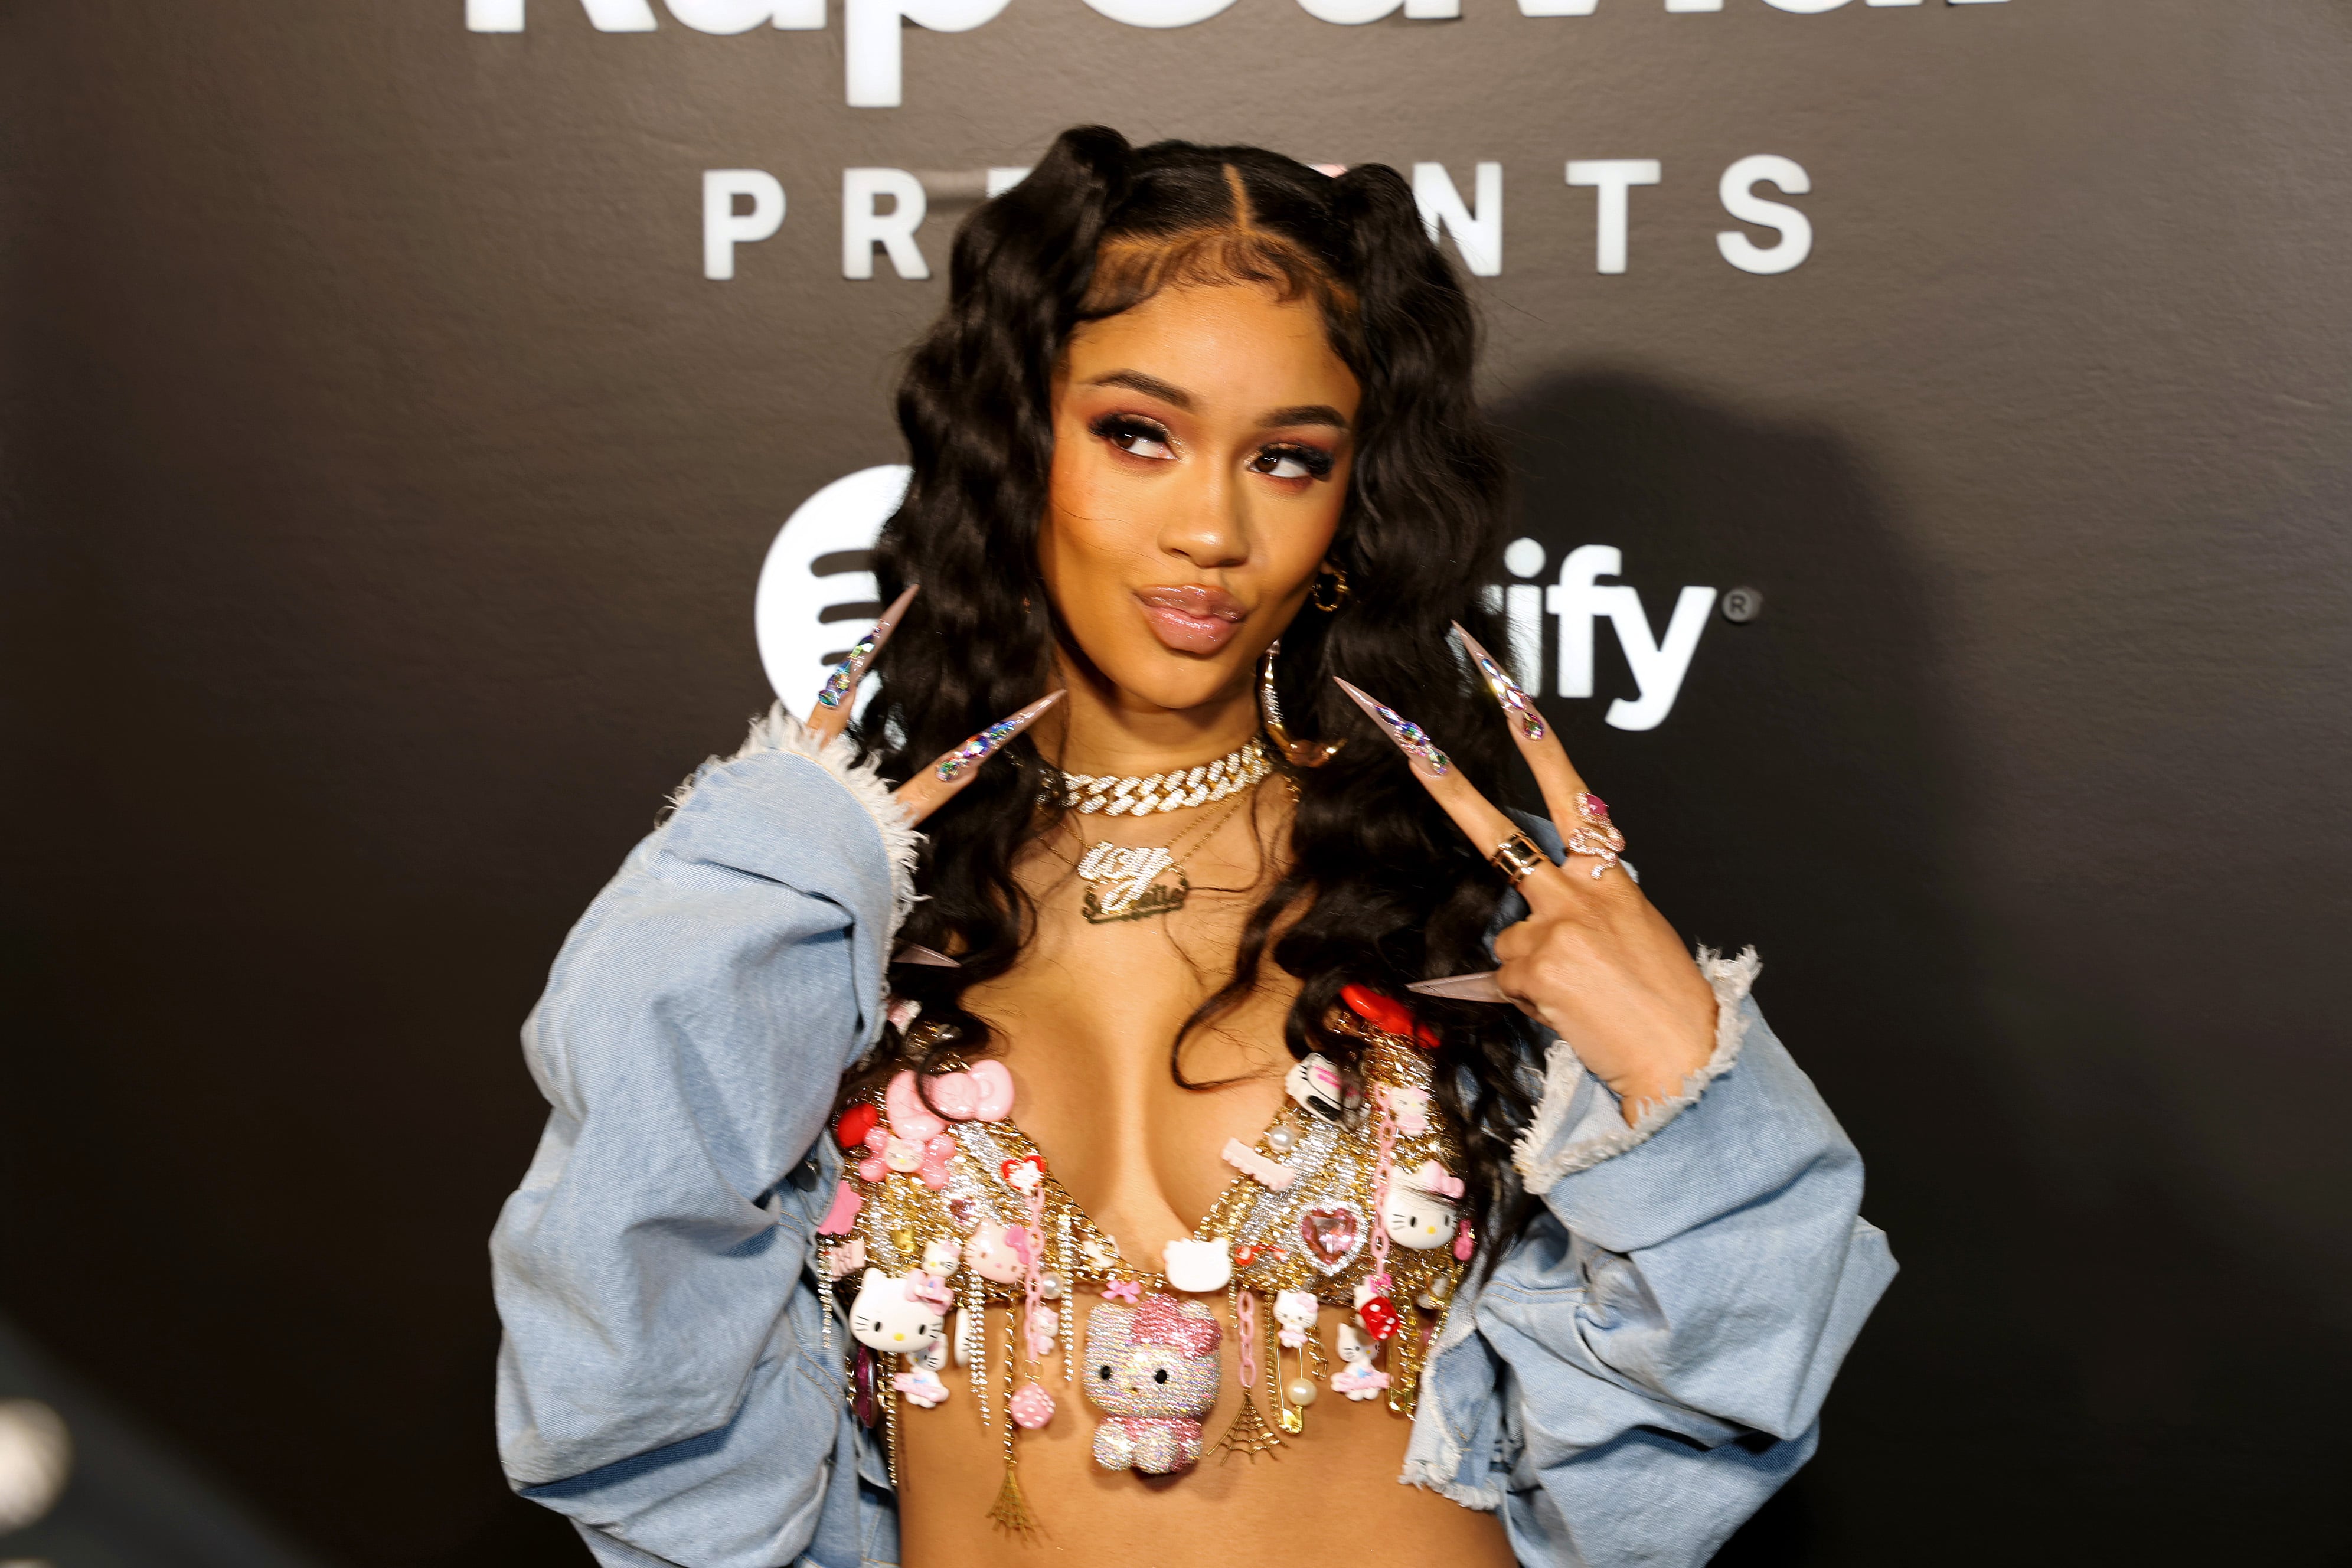 Fashion, Shopping & Style  Saweetie's Delicate Bra Top Is Held